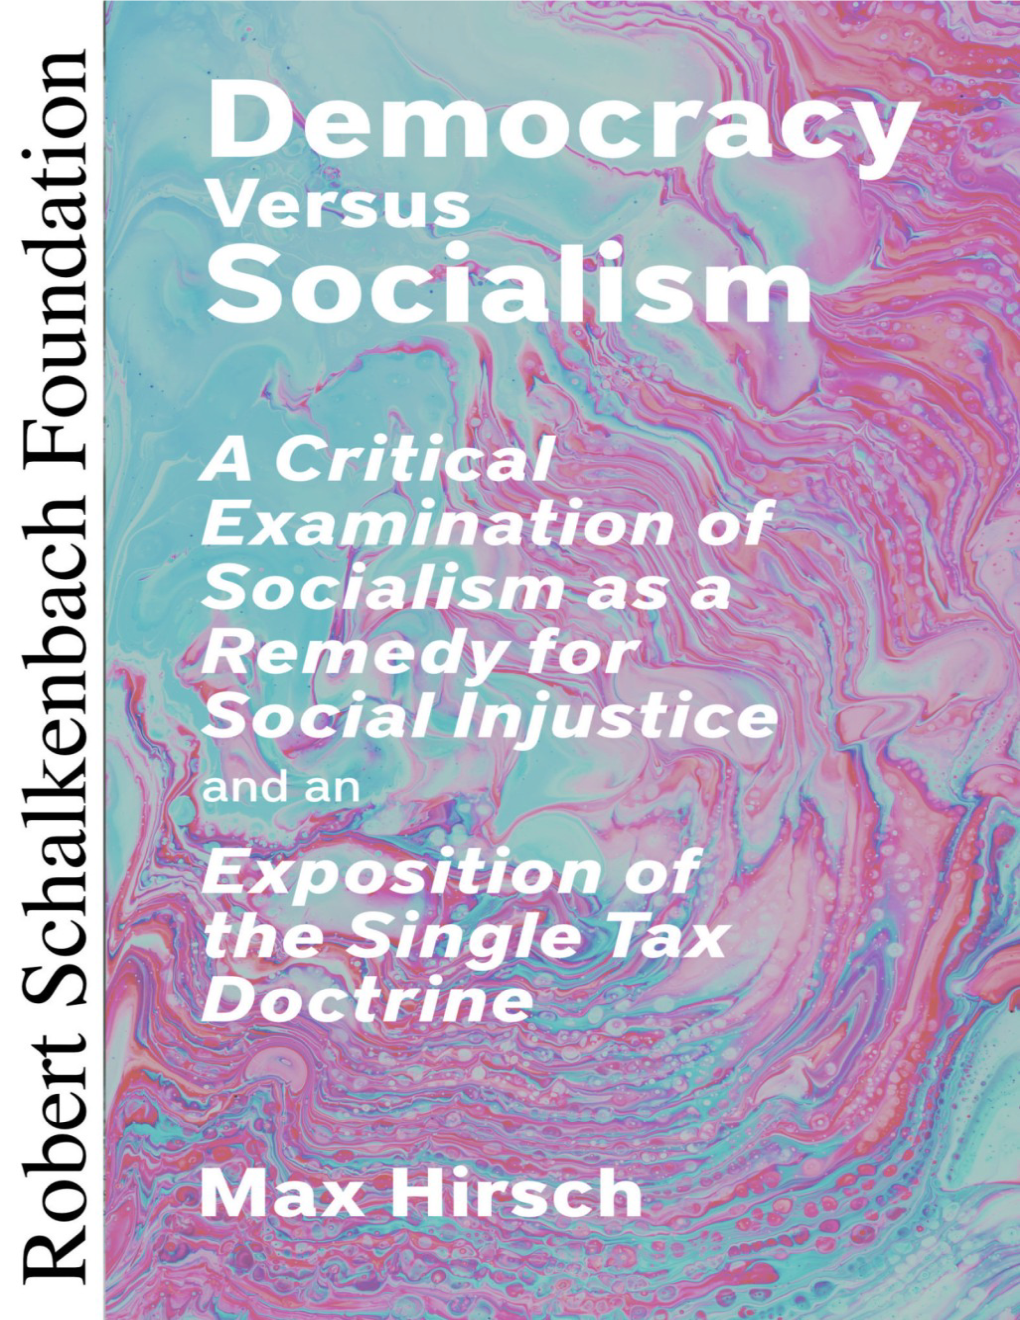 Democracy Versus Socialism a Critical Examination of Socialism As a Remedy for Social Injustice and an Exposition of the Single Tax Doctrine